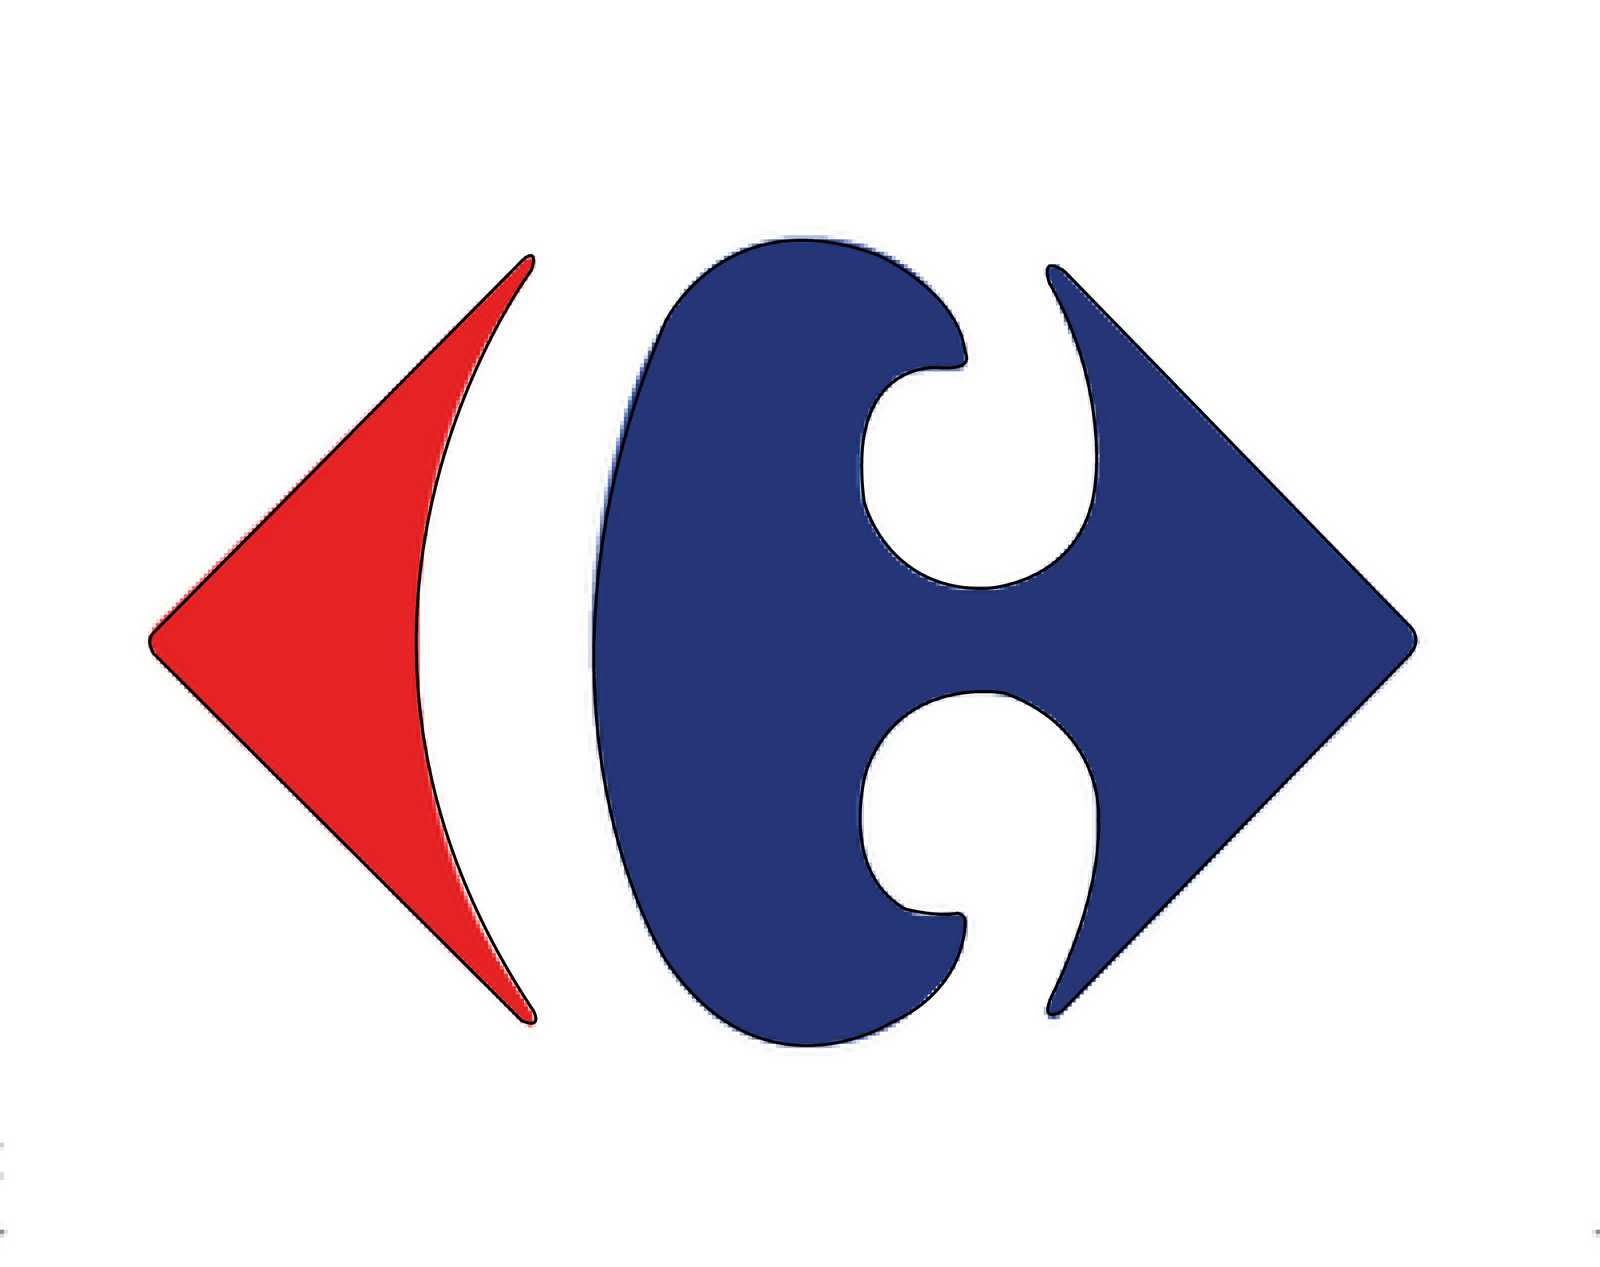 red and blue c logo quiz